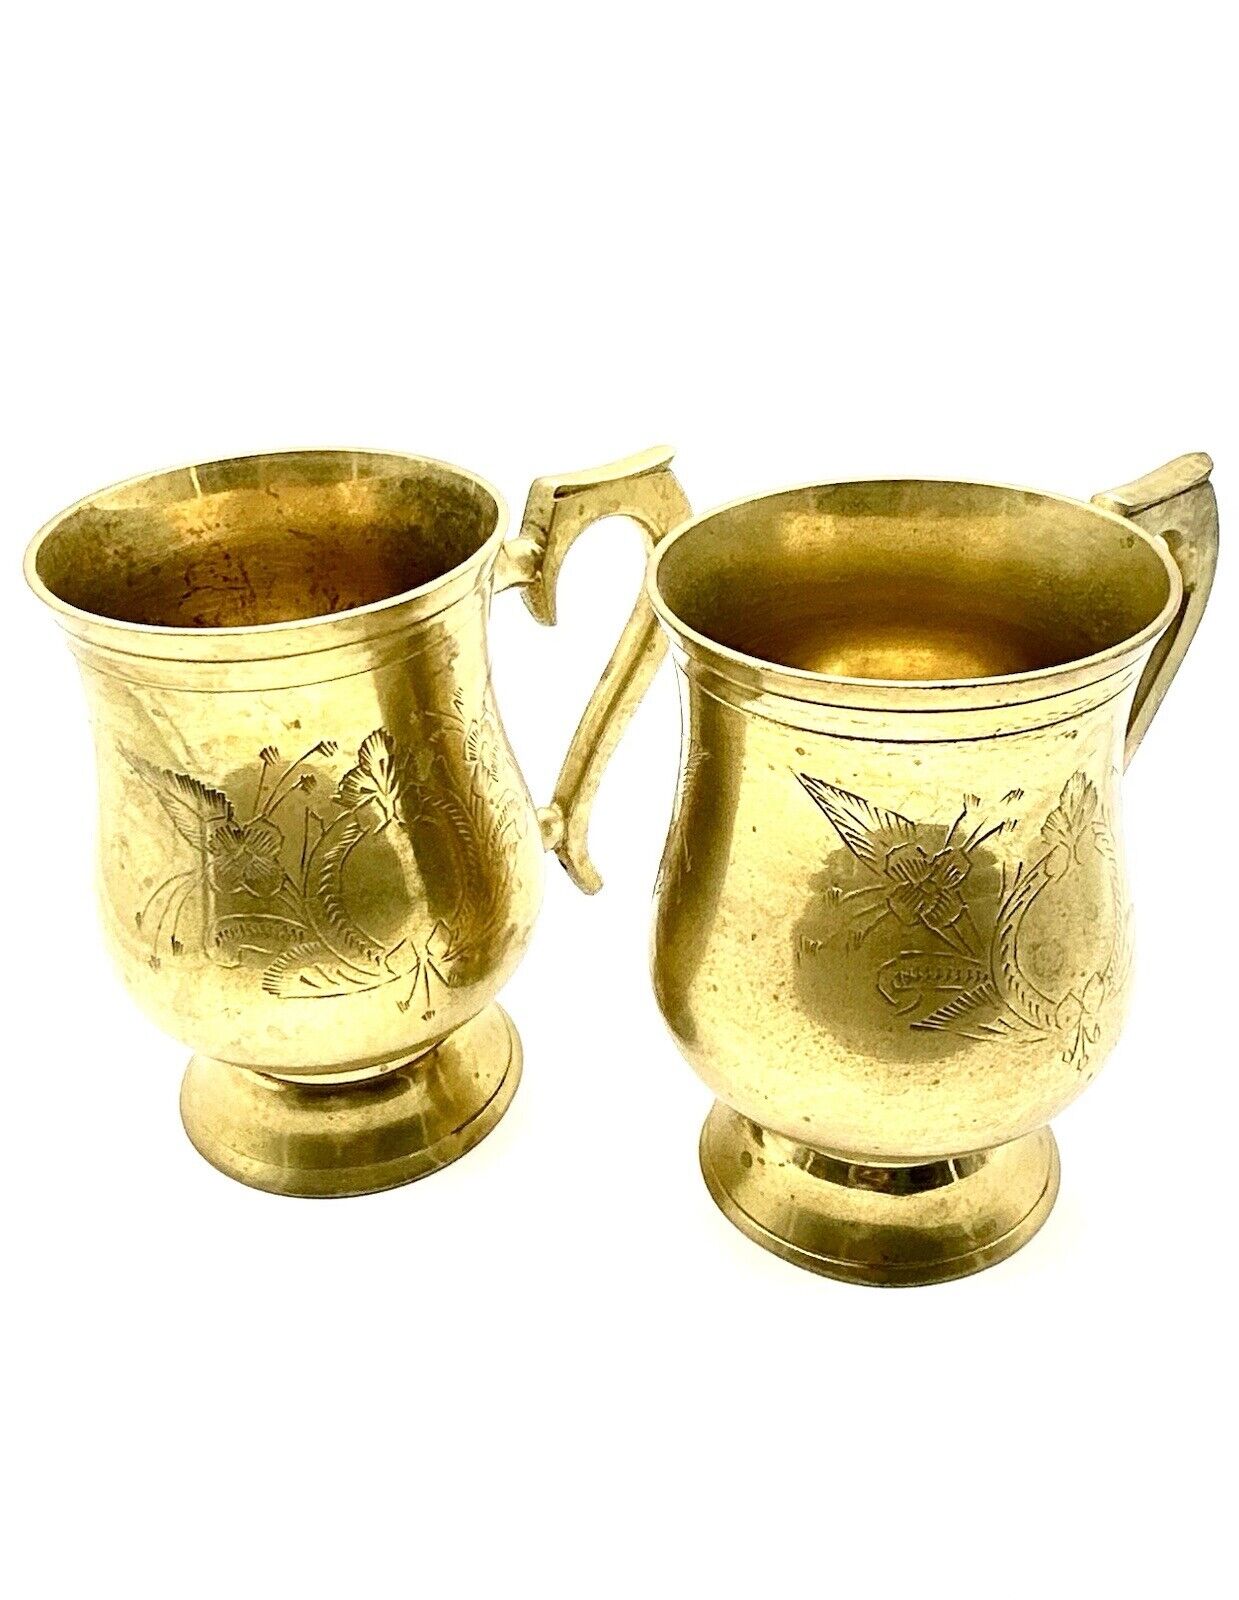 Two Vintage Etched Brass Steins